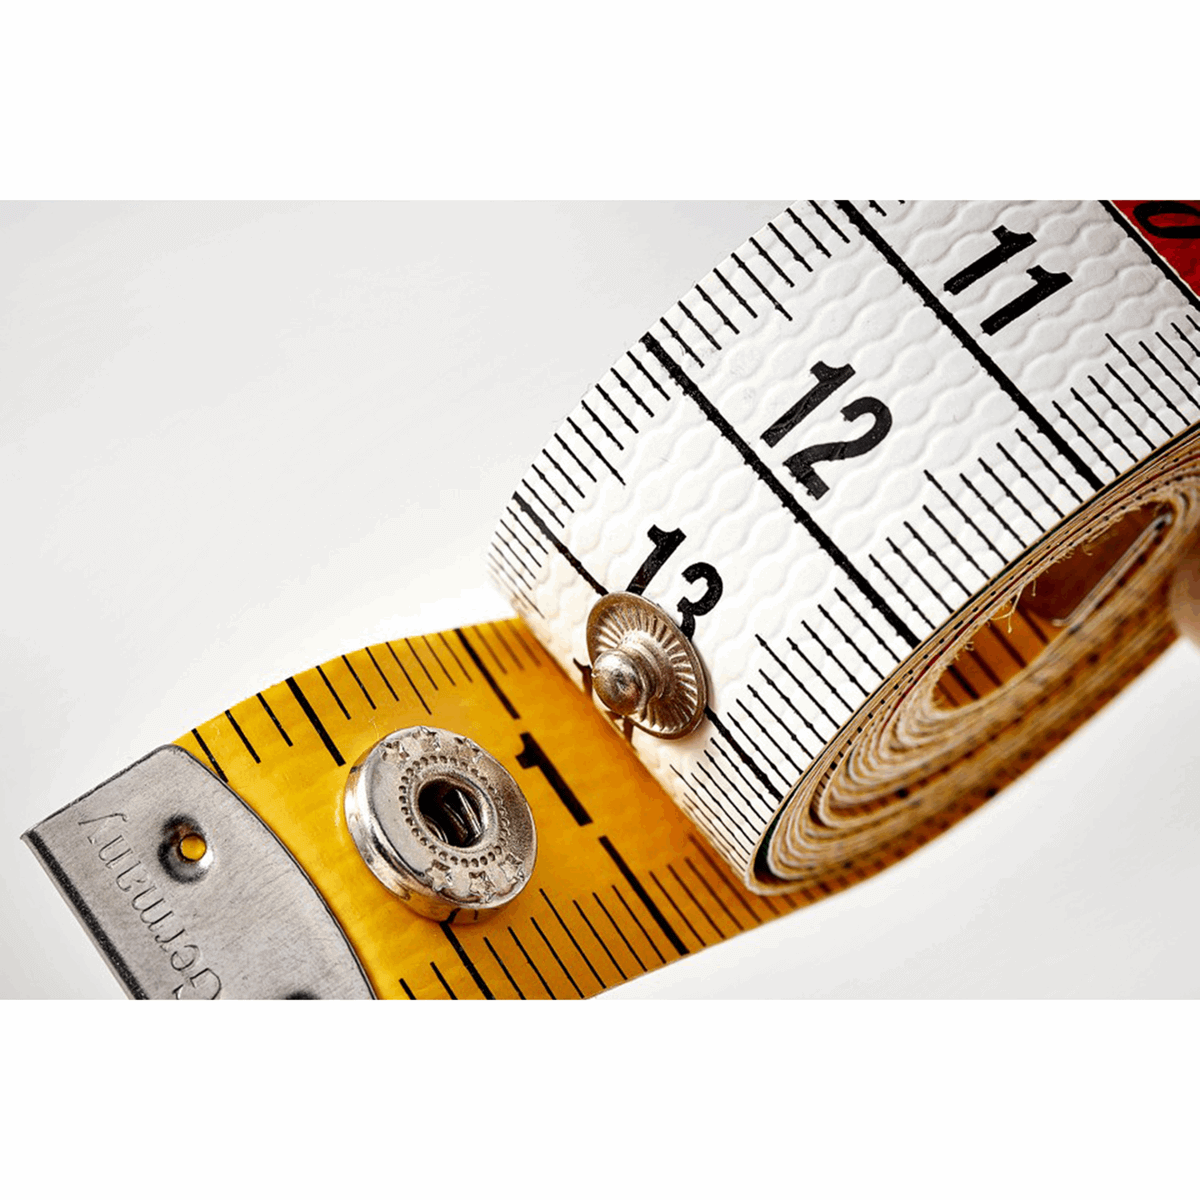 Professional Tailors Tape Measure with snap fastener. Sewing, crafts. 60 in/150 cm.